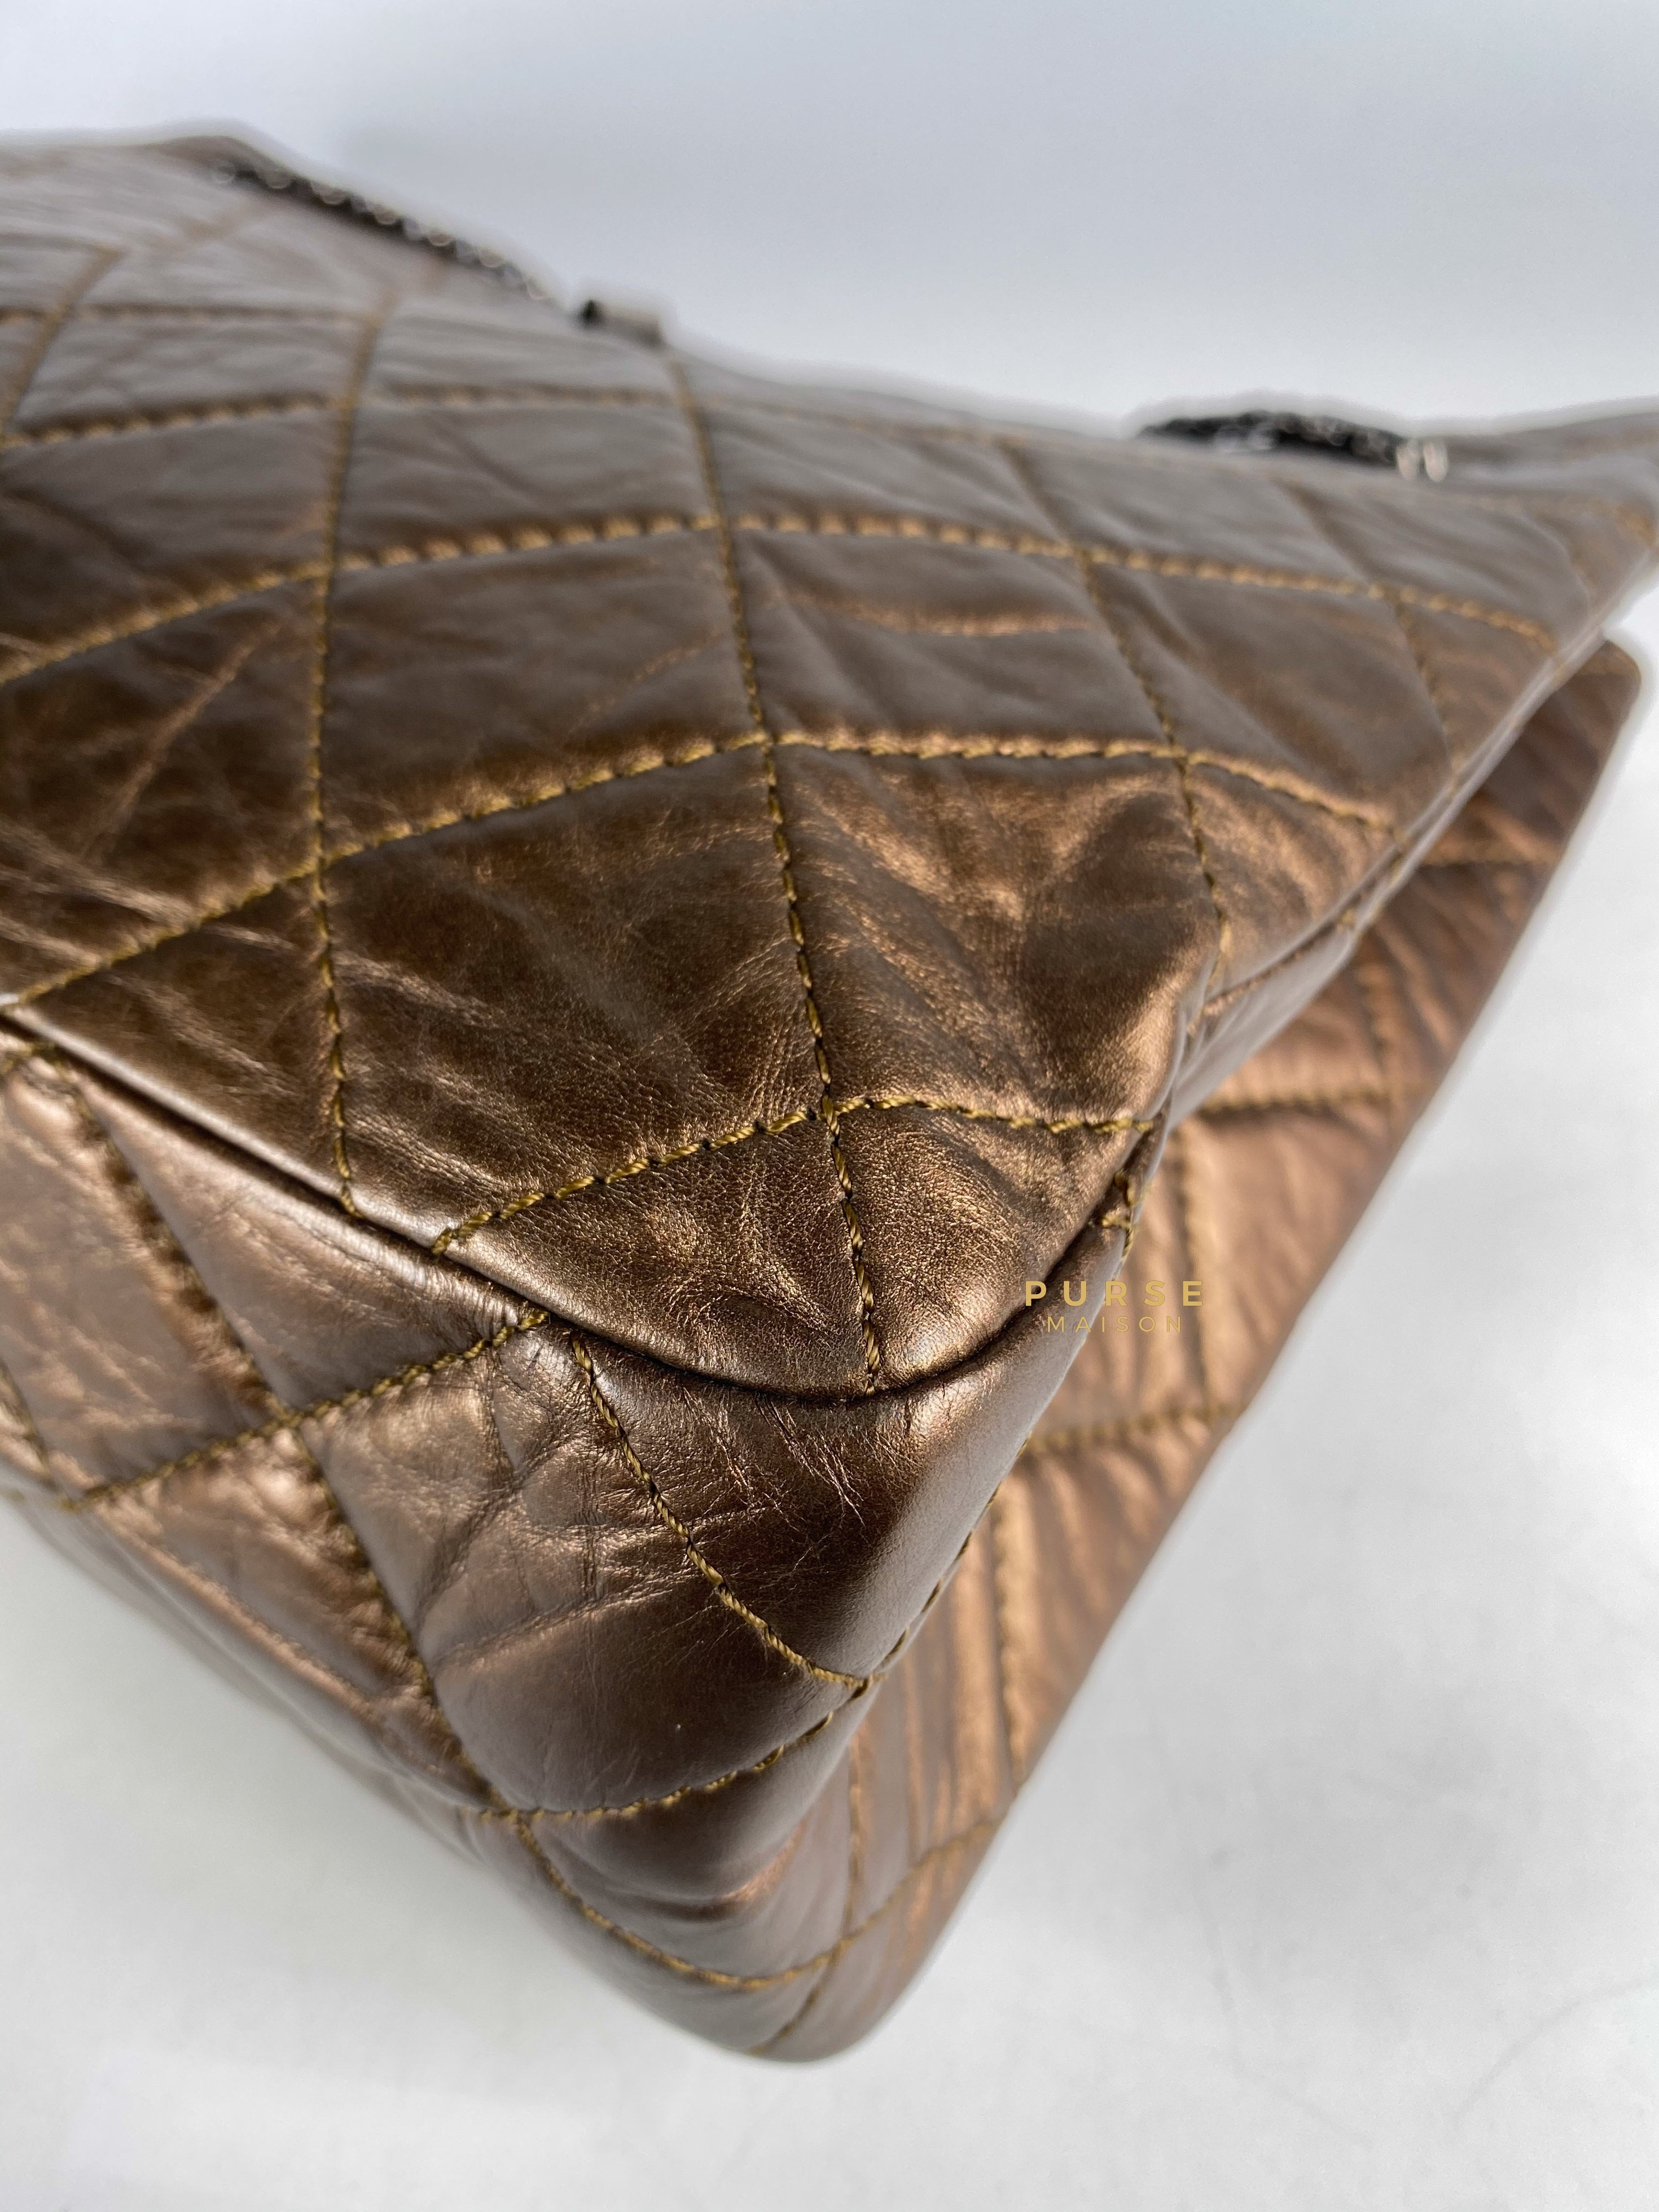 Chanel Reissue Bronze Quilted Distressed Calfskin Leather Tote Bag Series 12 | Purse Maison Luxury Bags Shop